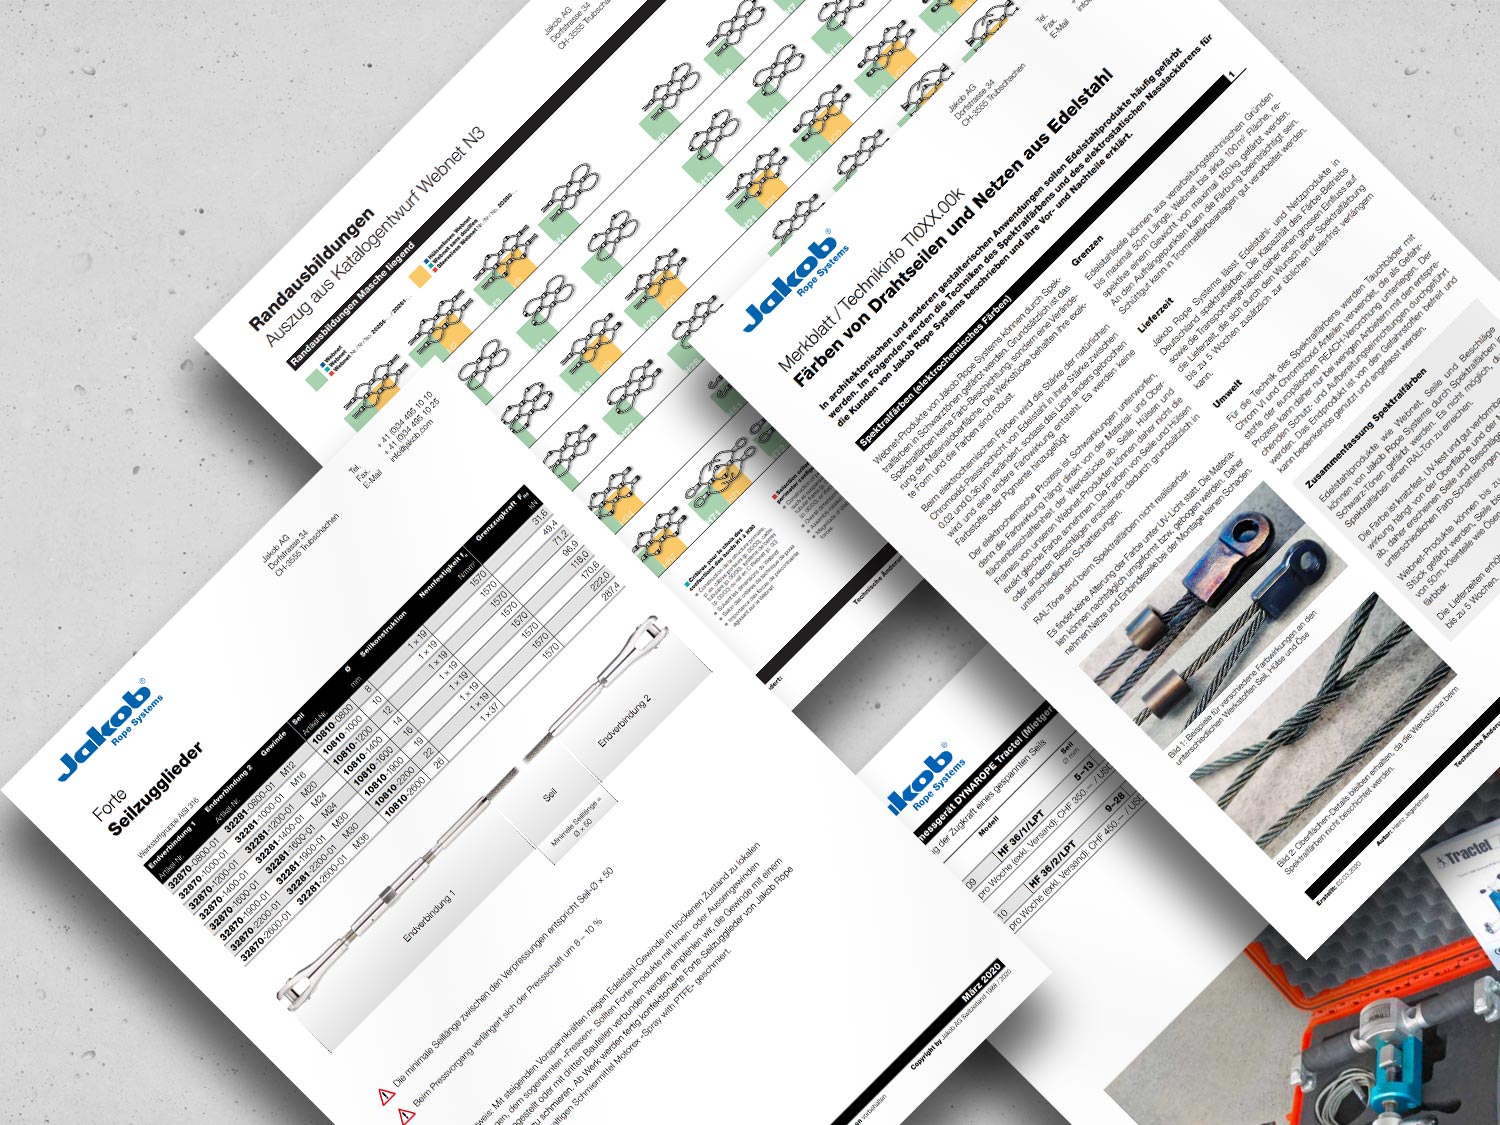 [Translate to Spain (ES), Spanish (Default):] Collage of technical information sheets by Jakob